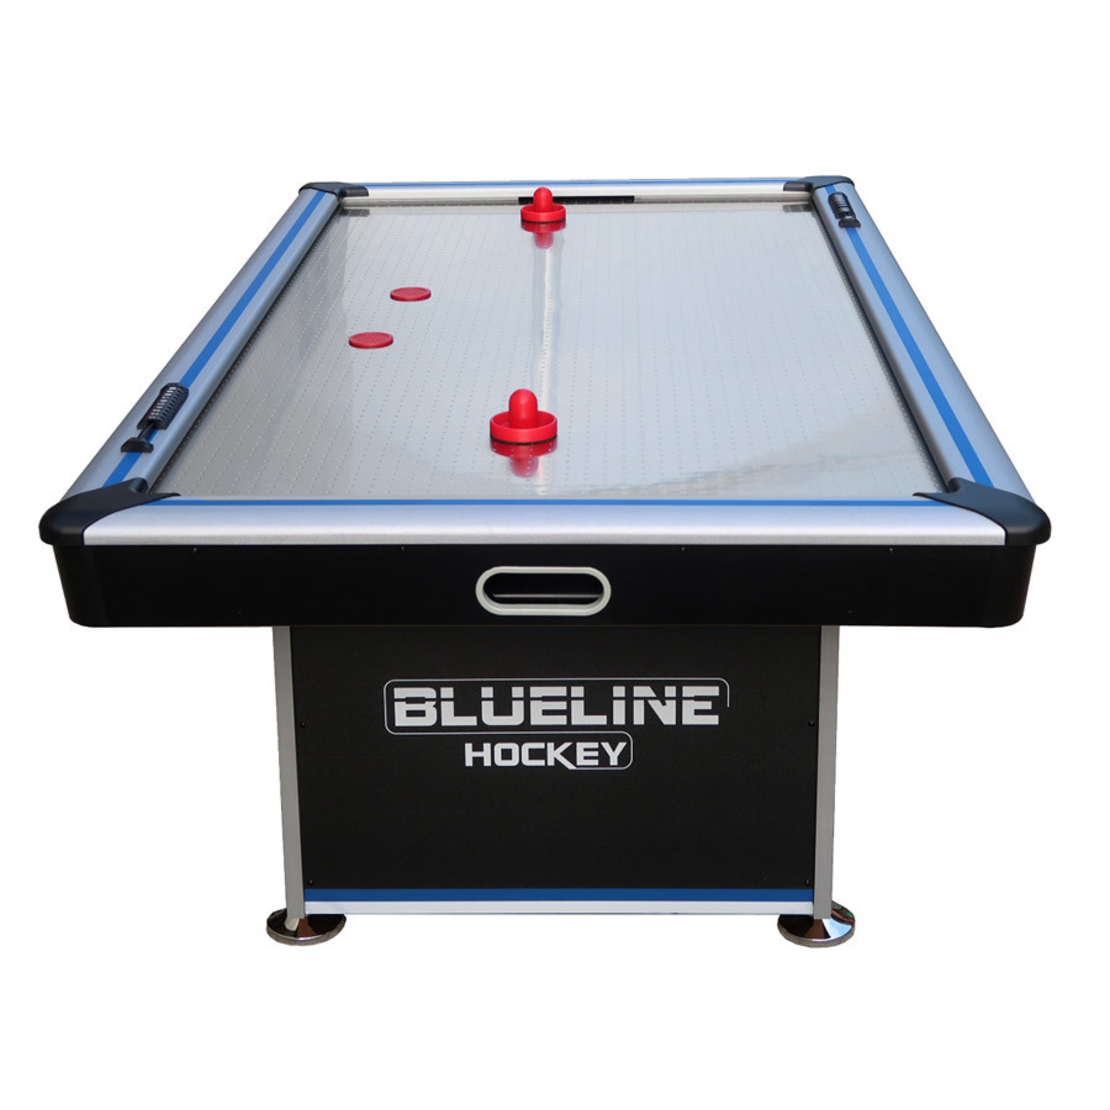 HOCKEY TABLE 5 FIT BLUE LINE